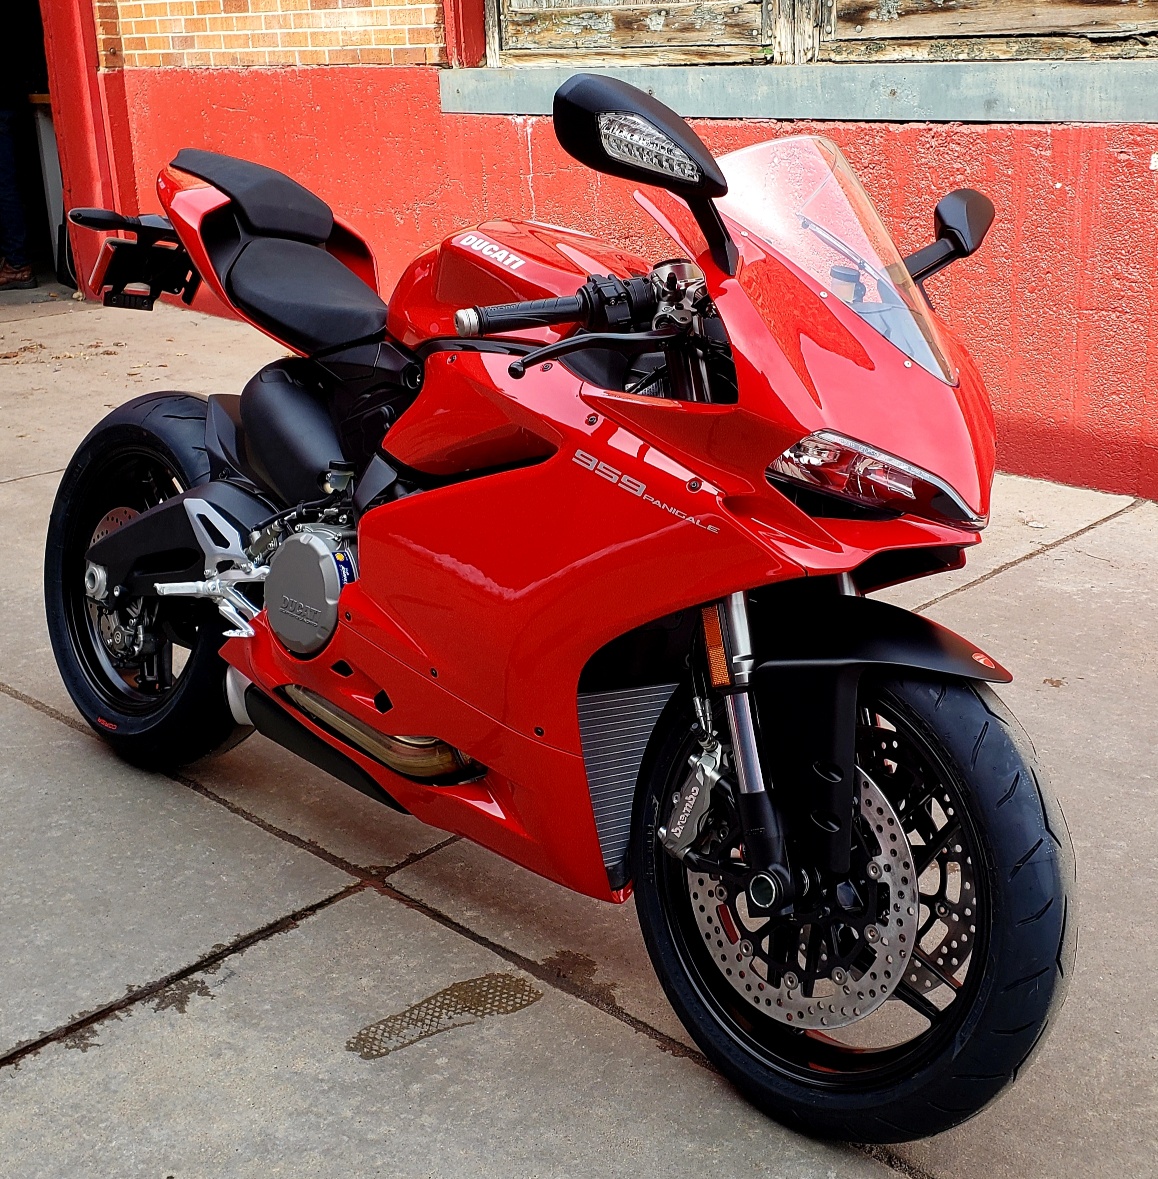 New 2019 DUCATI PANIGALE 959 RED Motorcycle in Denver #19D12 | Erico ...